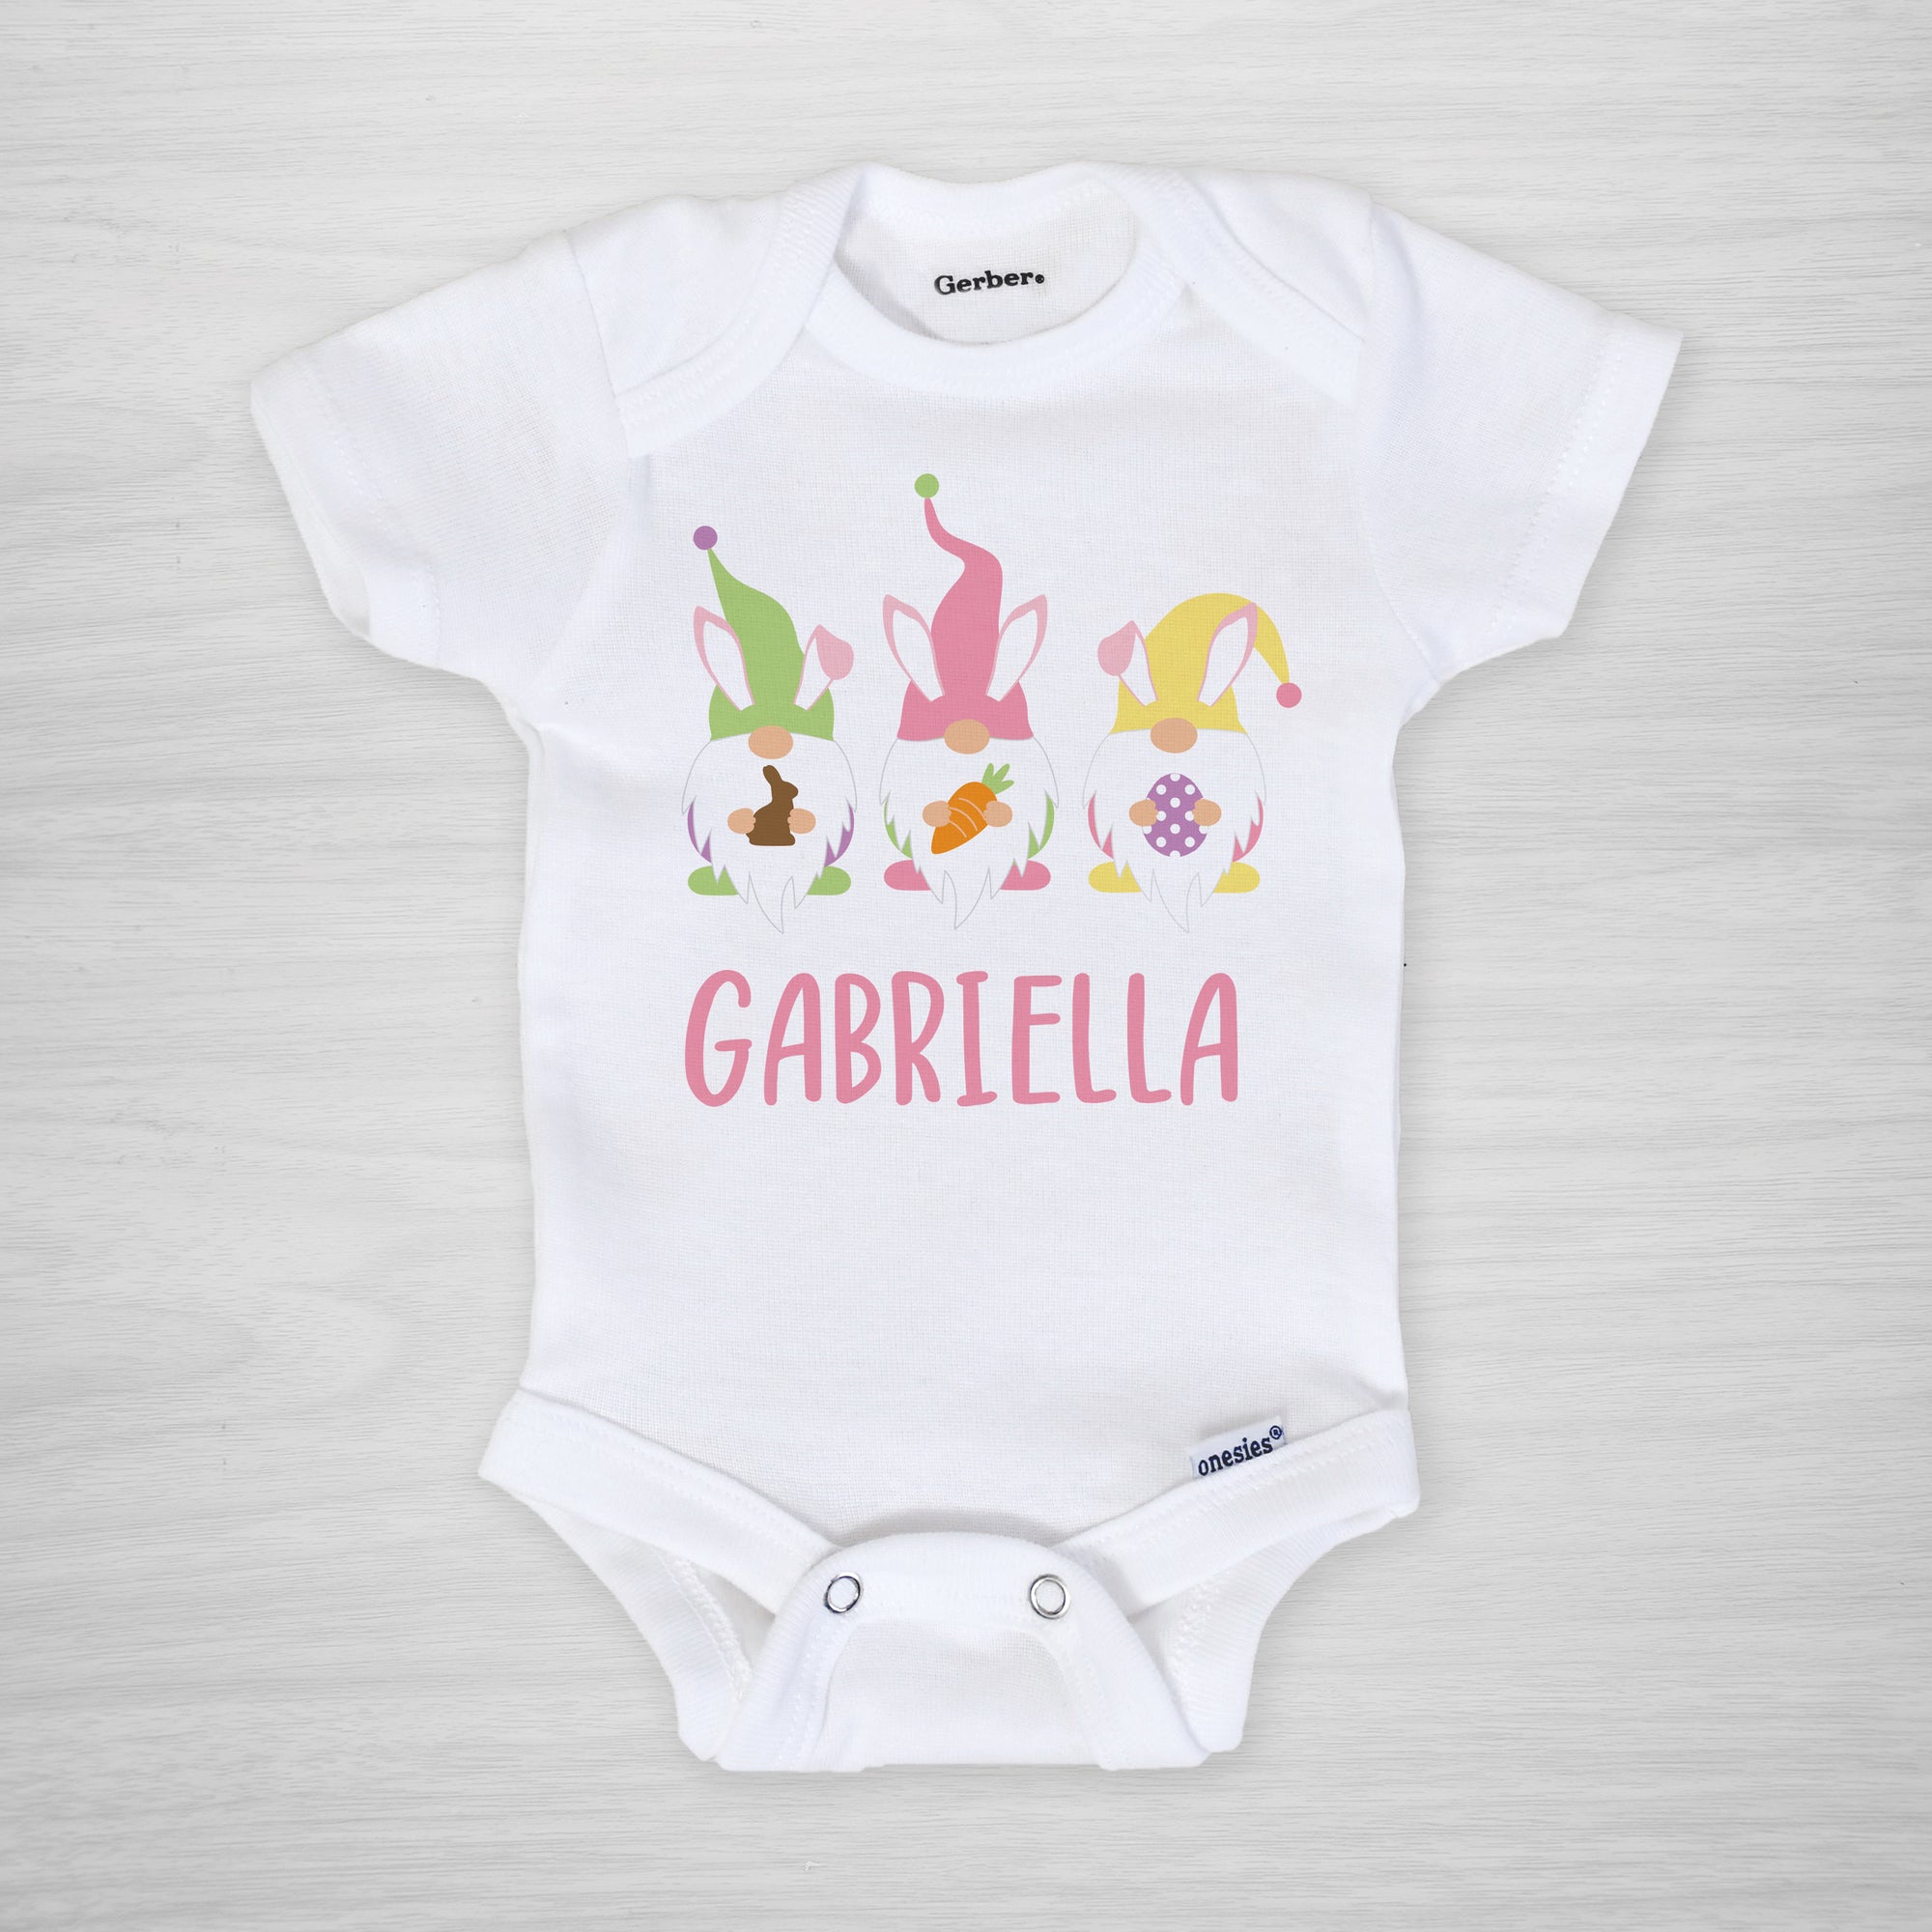 Easter gnome personalized onesie, with bunny ear gnomes and sweet Easter treats, short sleeved